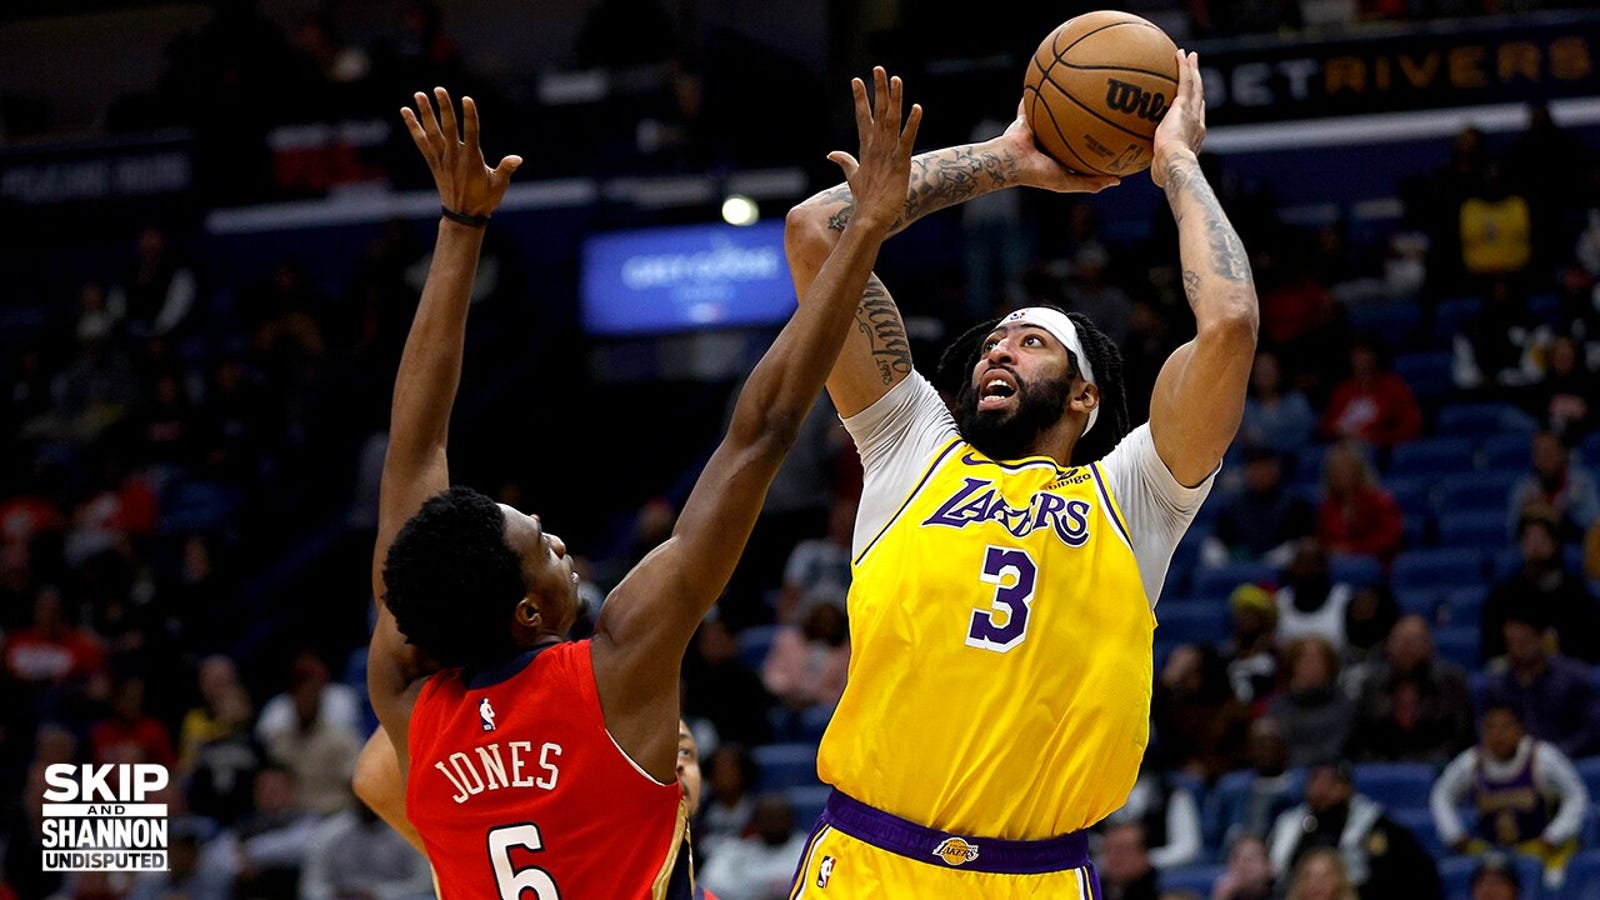 Lakers defeat Pelicans behind Anthony Davis' 35 Pts, 17 Reb performance